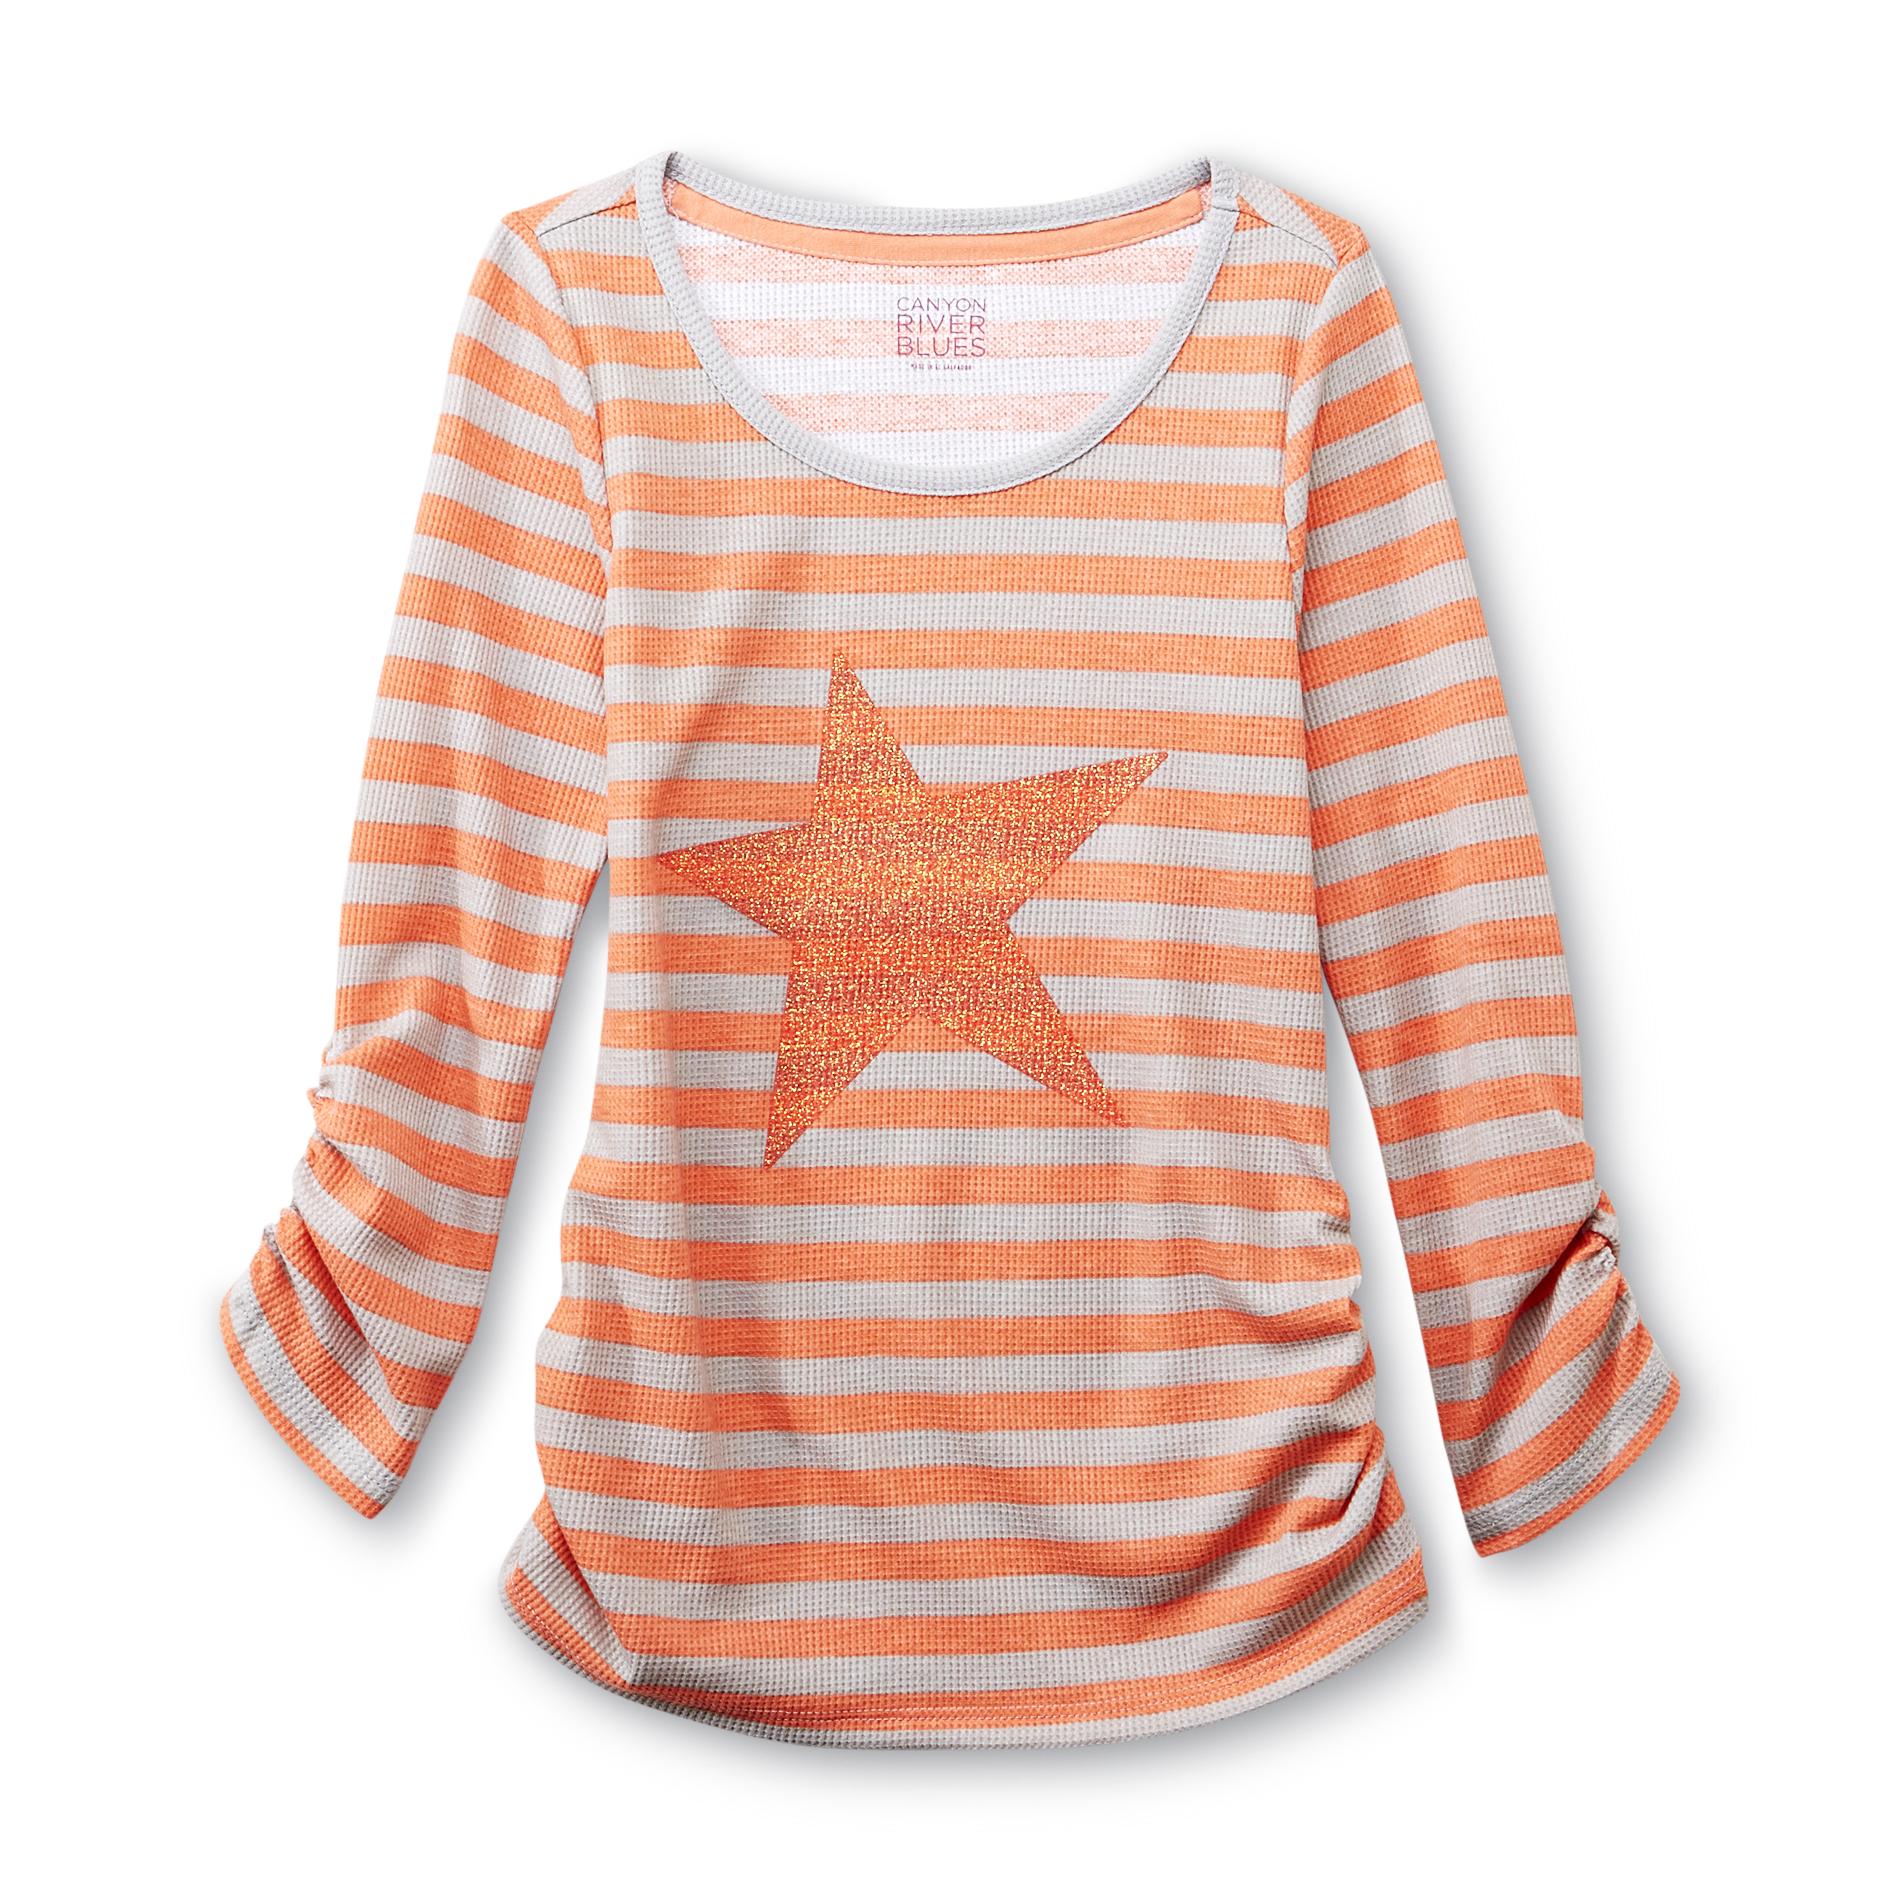 Canyon River Blues Girl's Thermal Top - Star